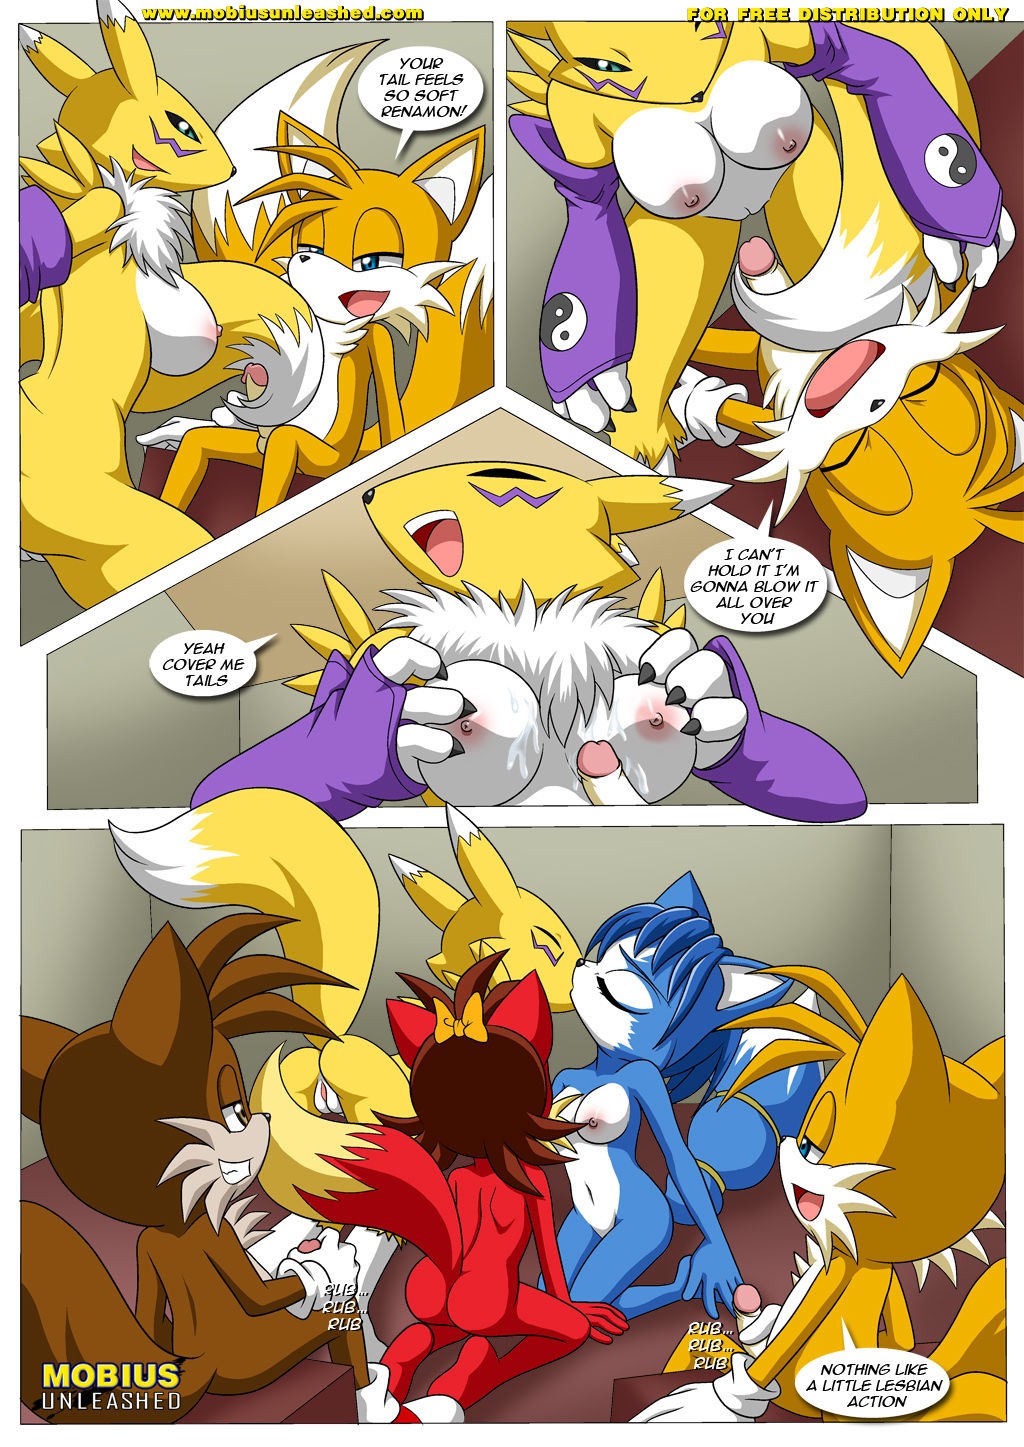 FoXXXes 2: 2 Much Tail porn comic picture 8